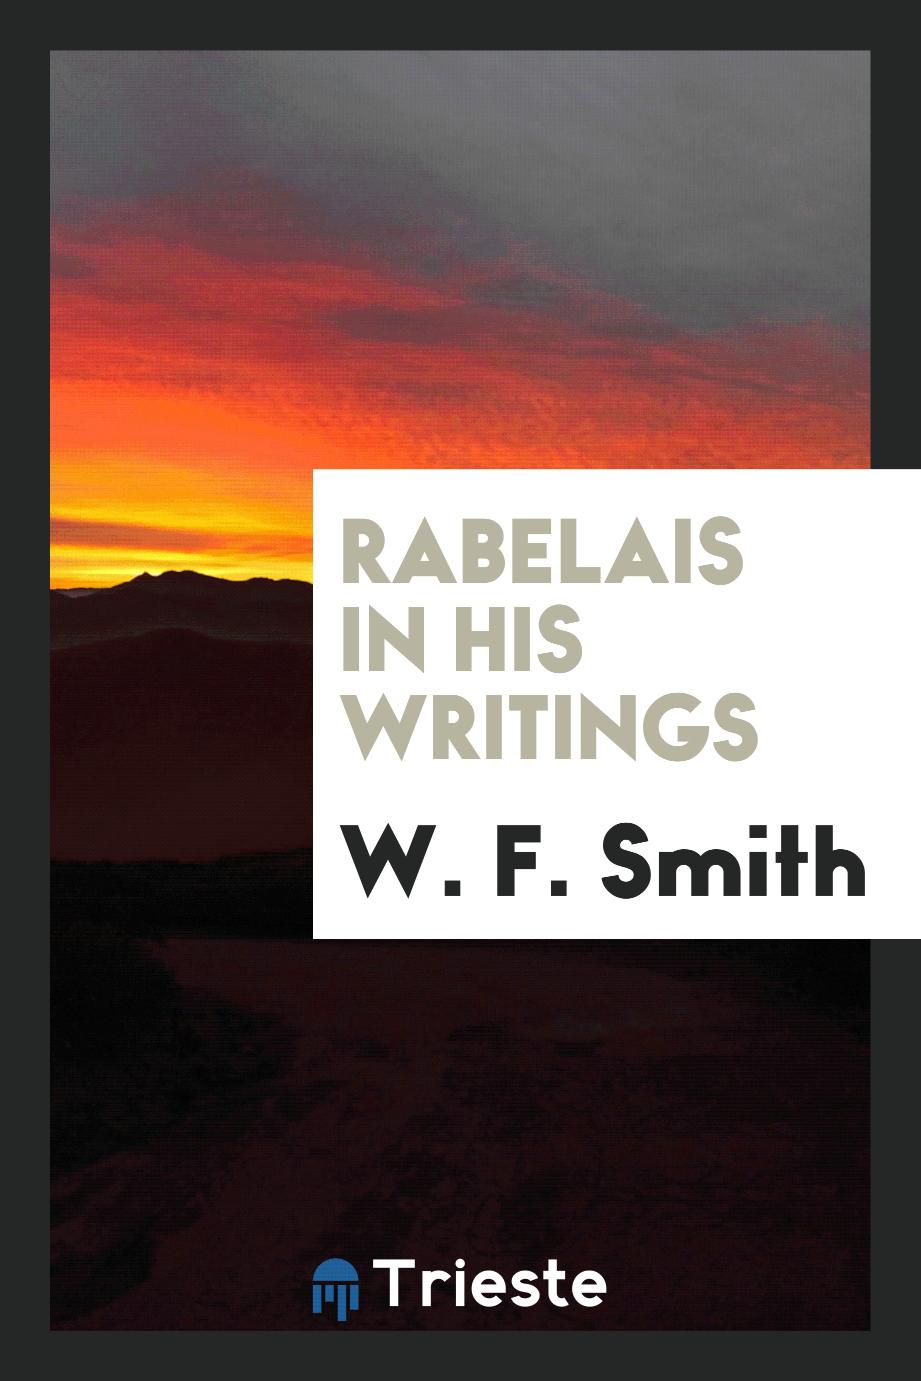 Rabelais in his writings